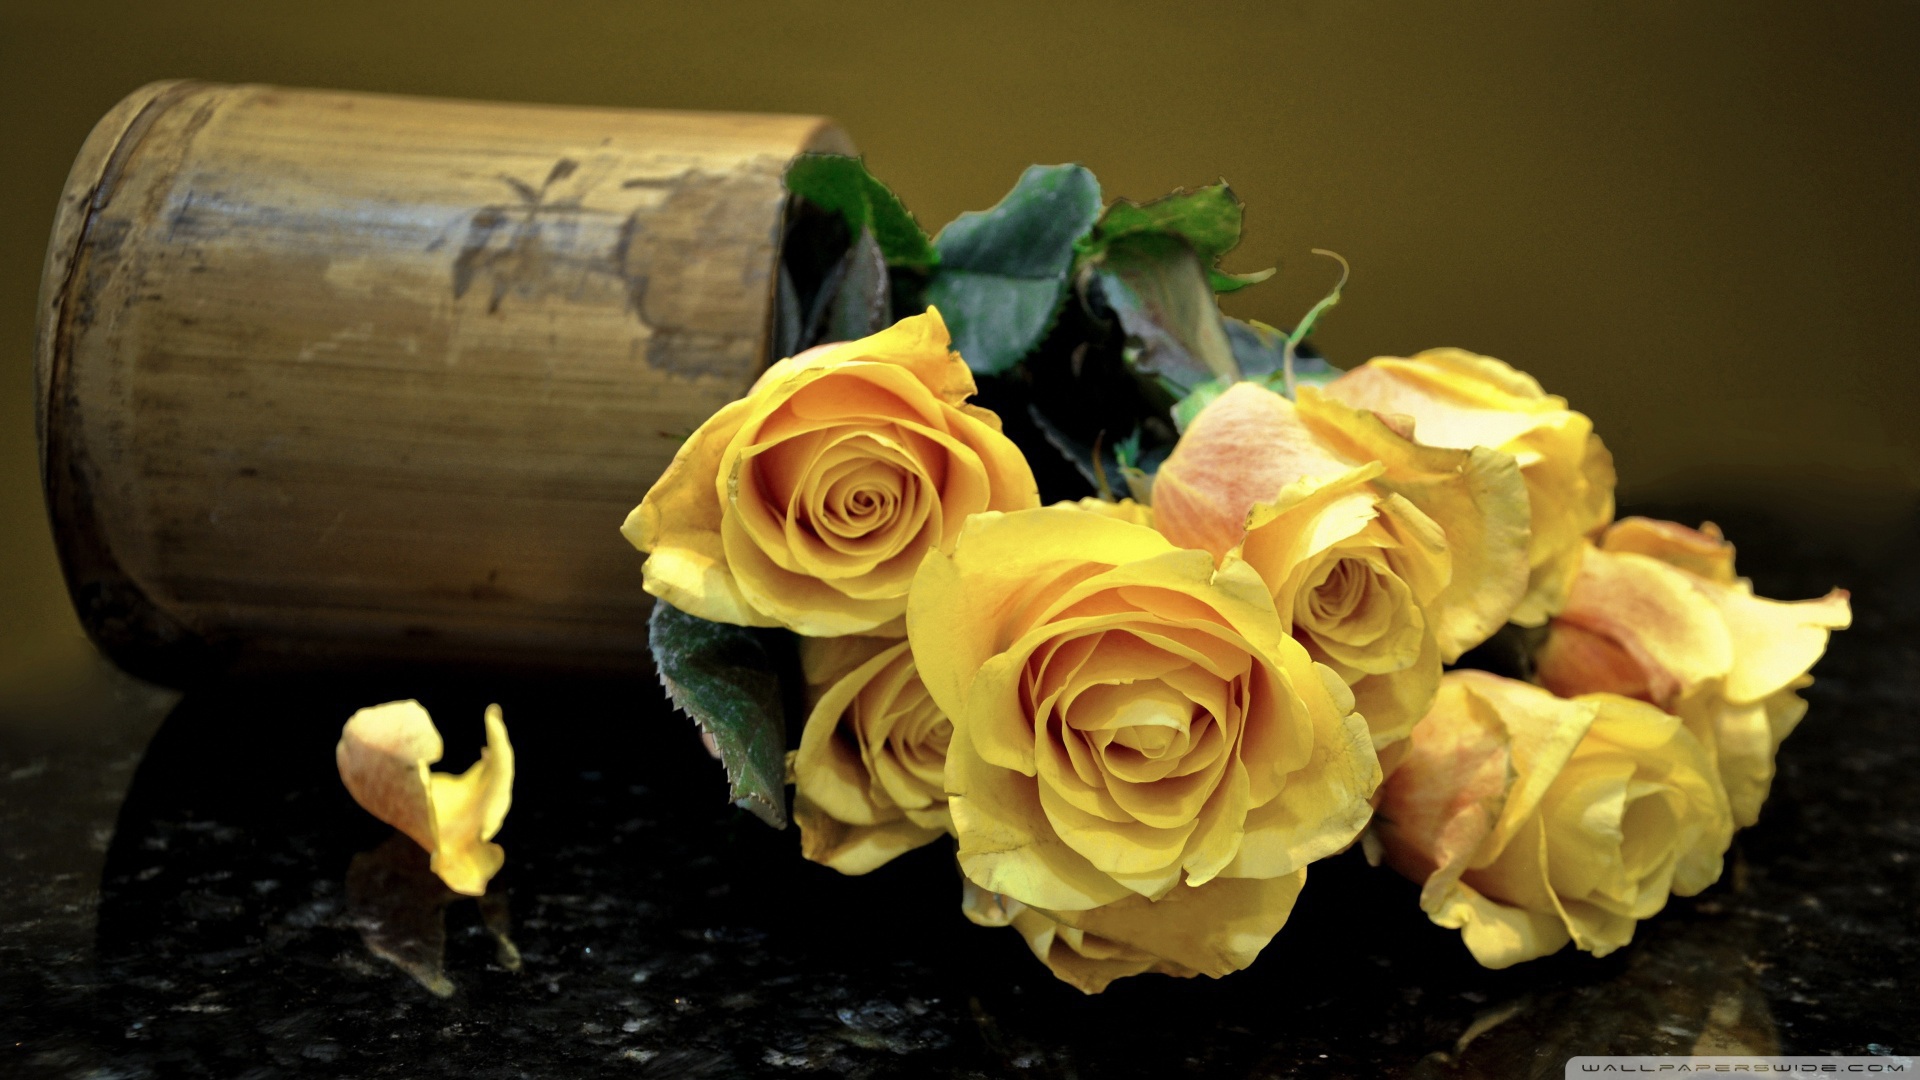 Yellow roses on a dark table